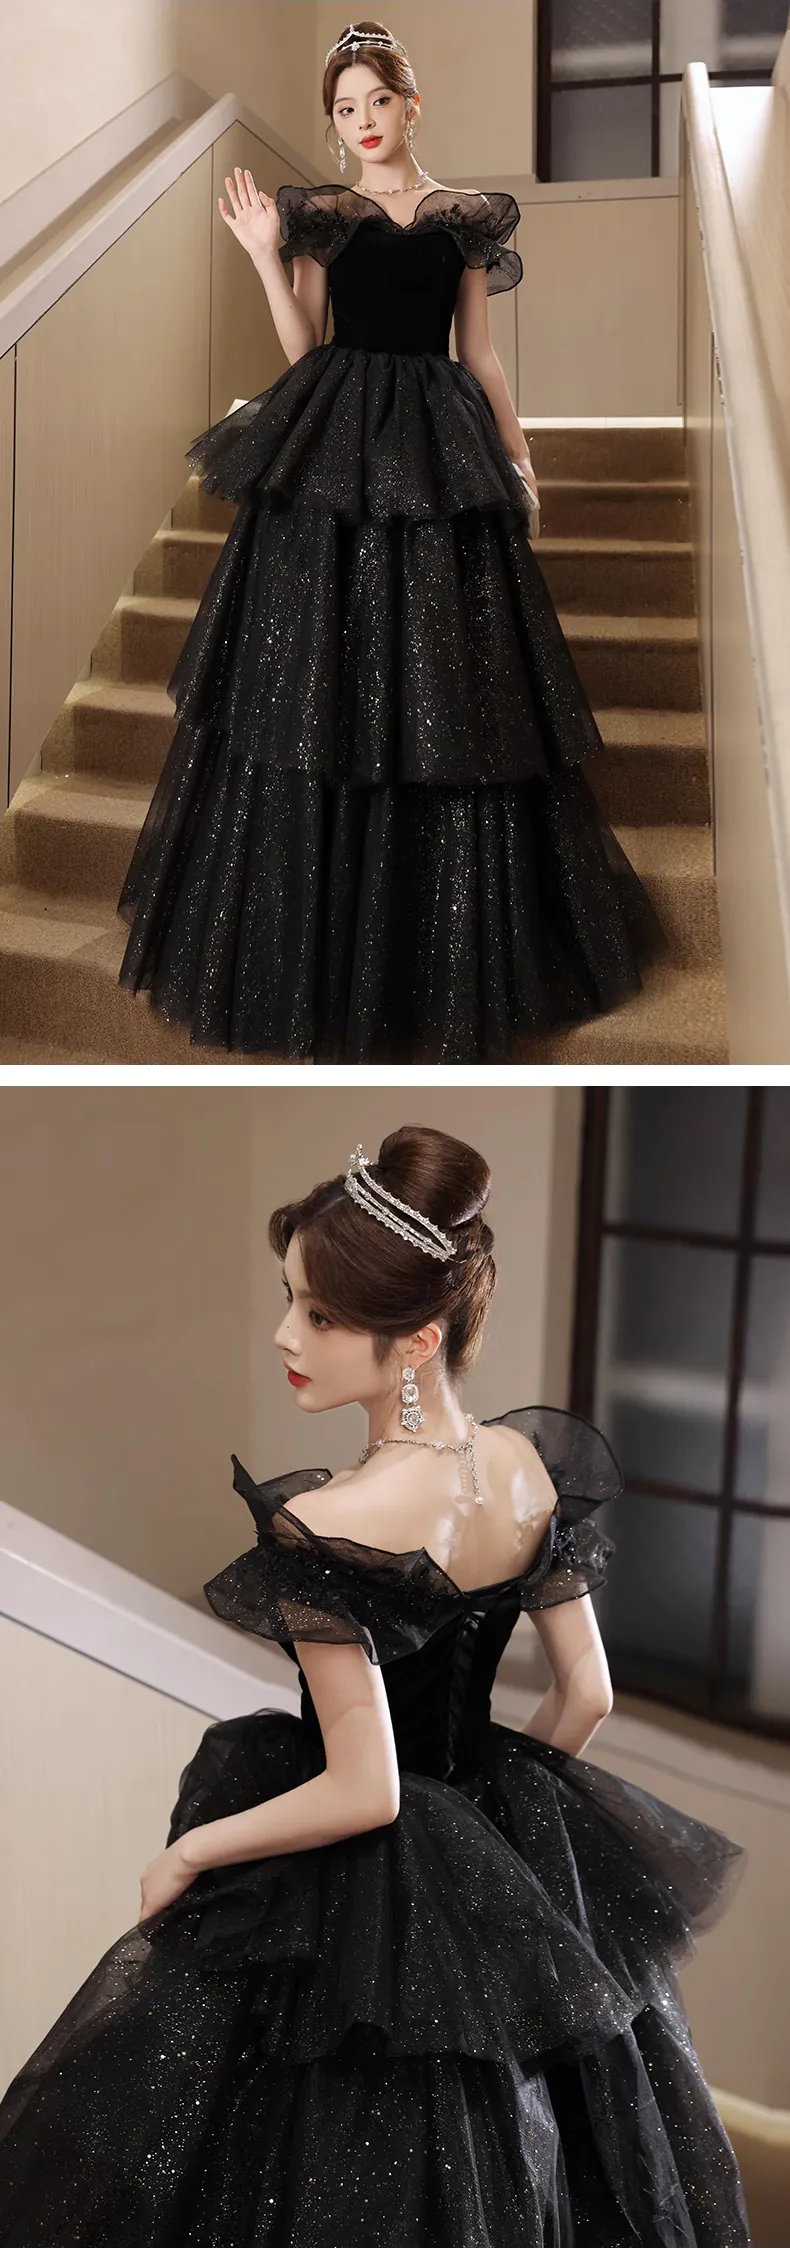 Fluffy-Off-the-Shoulder-Black-Tulle-Prom-Evening-Dress-Puffy-Ball-Gown17